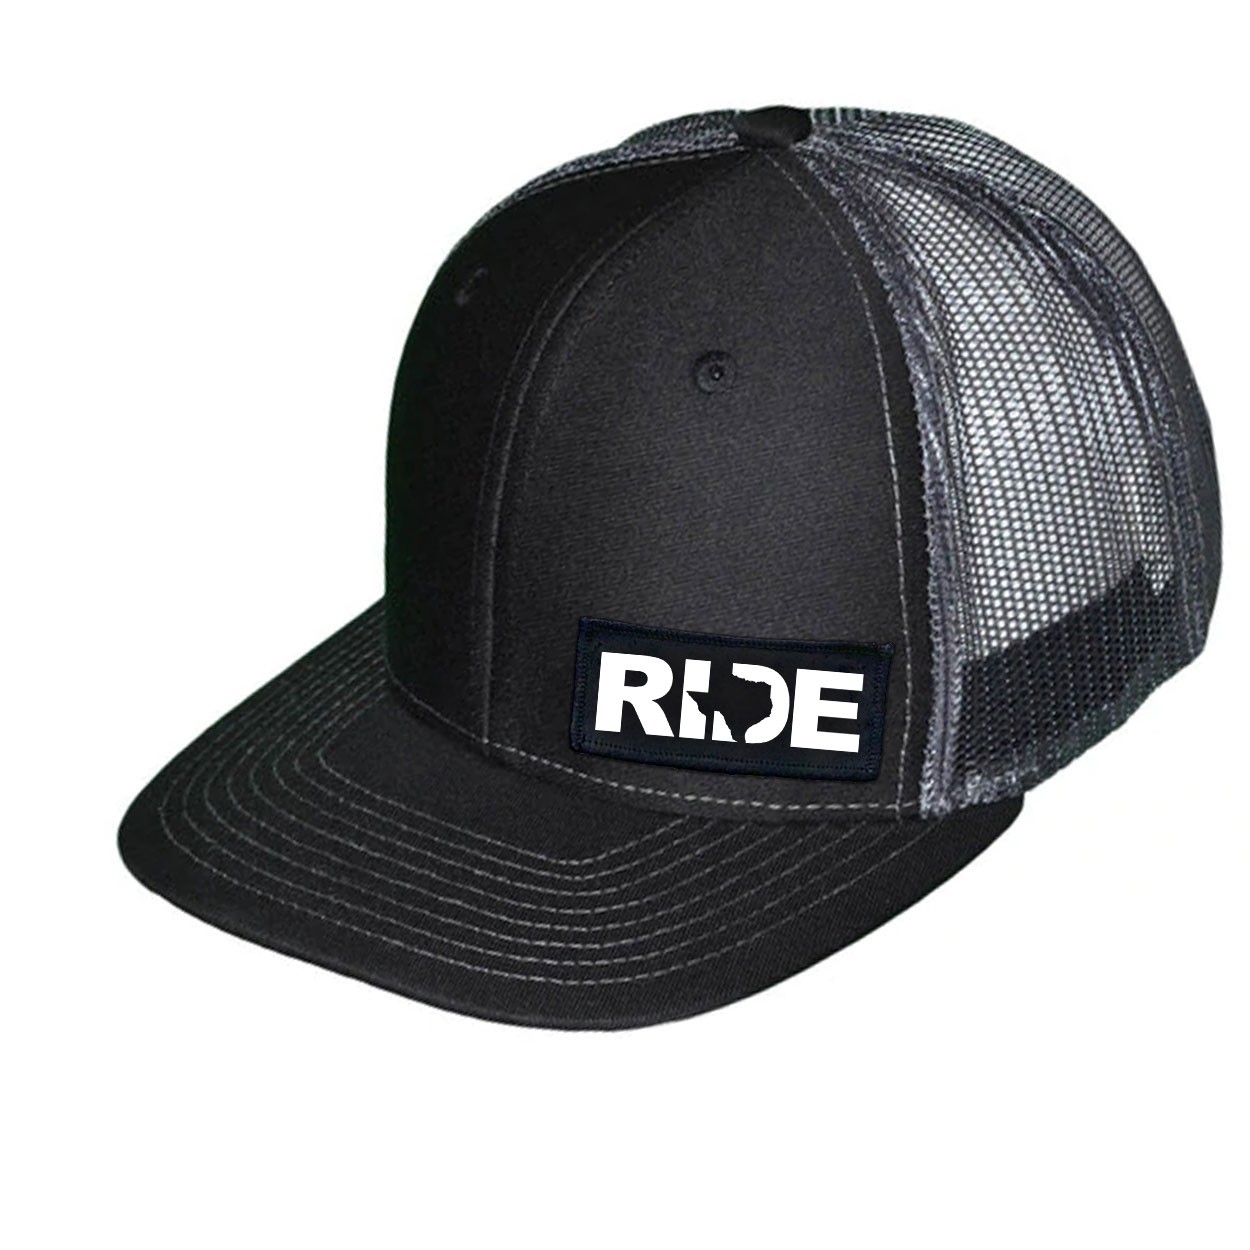 Ride Texas Night Out Woven Patch Snapback Trucker Hat Black/Charcoal (White Logo)